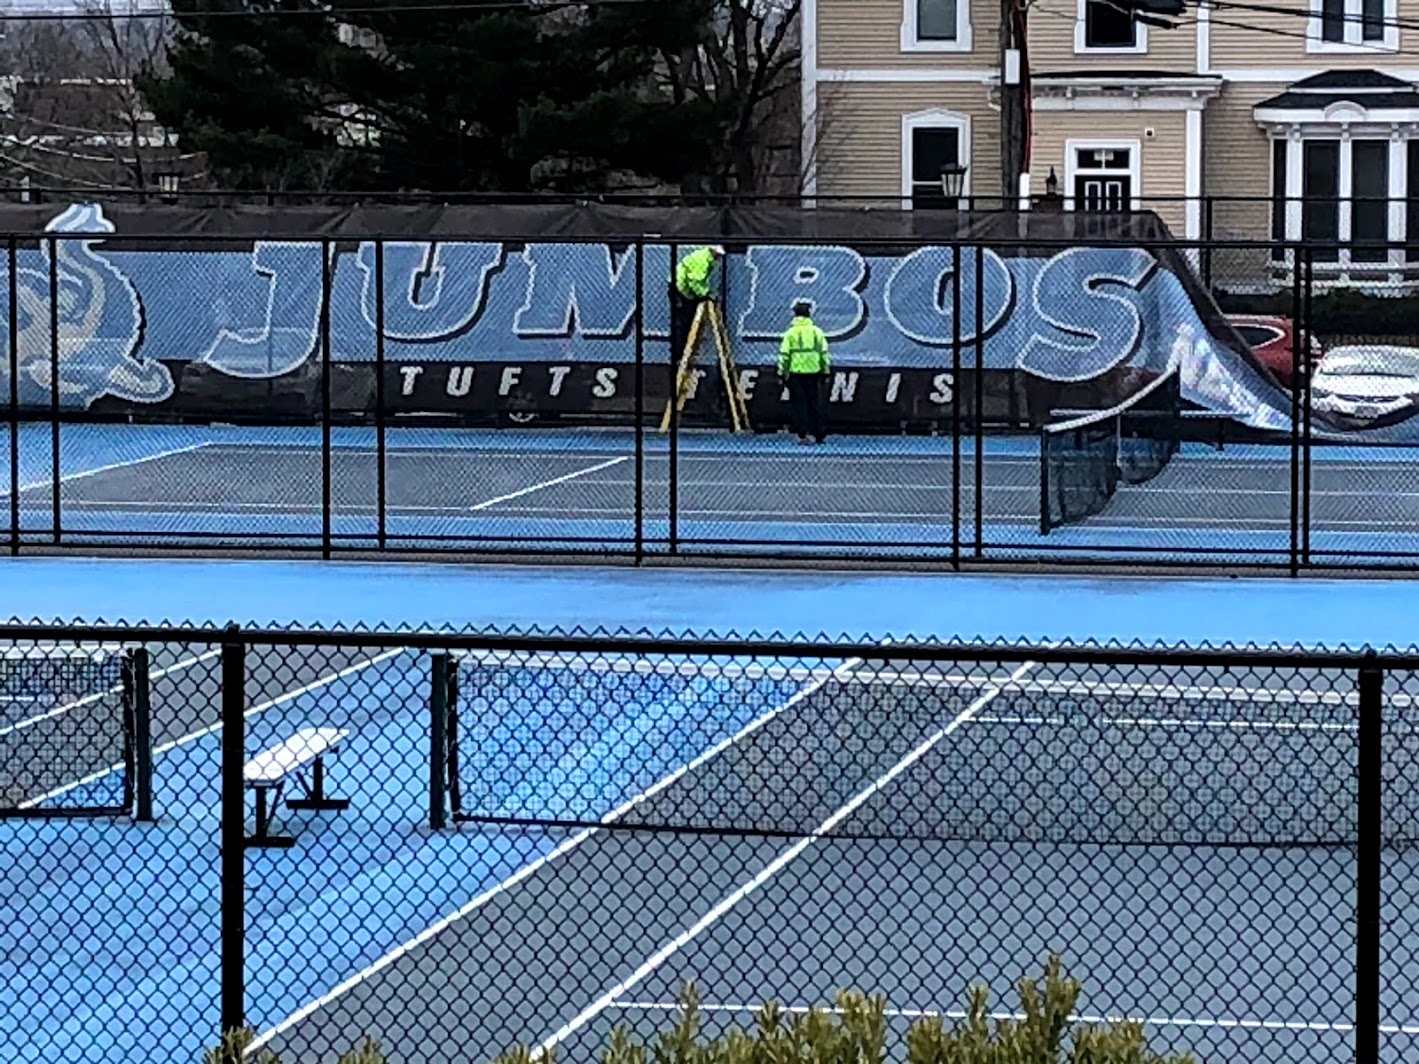 Tufts tennis courts